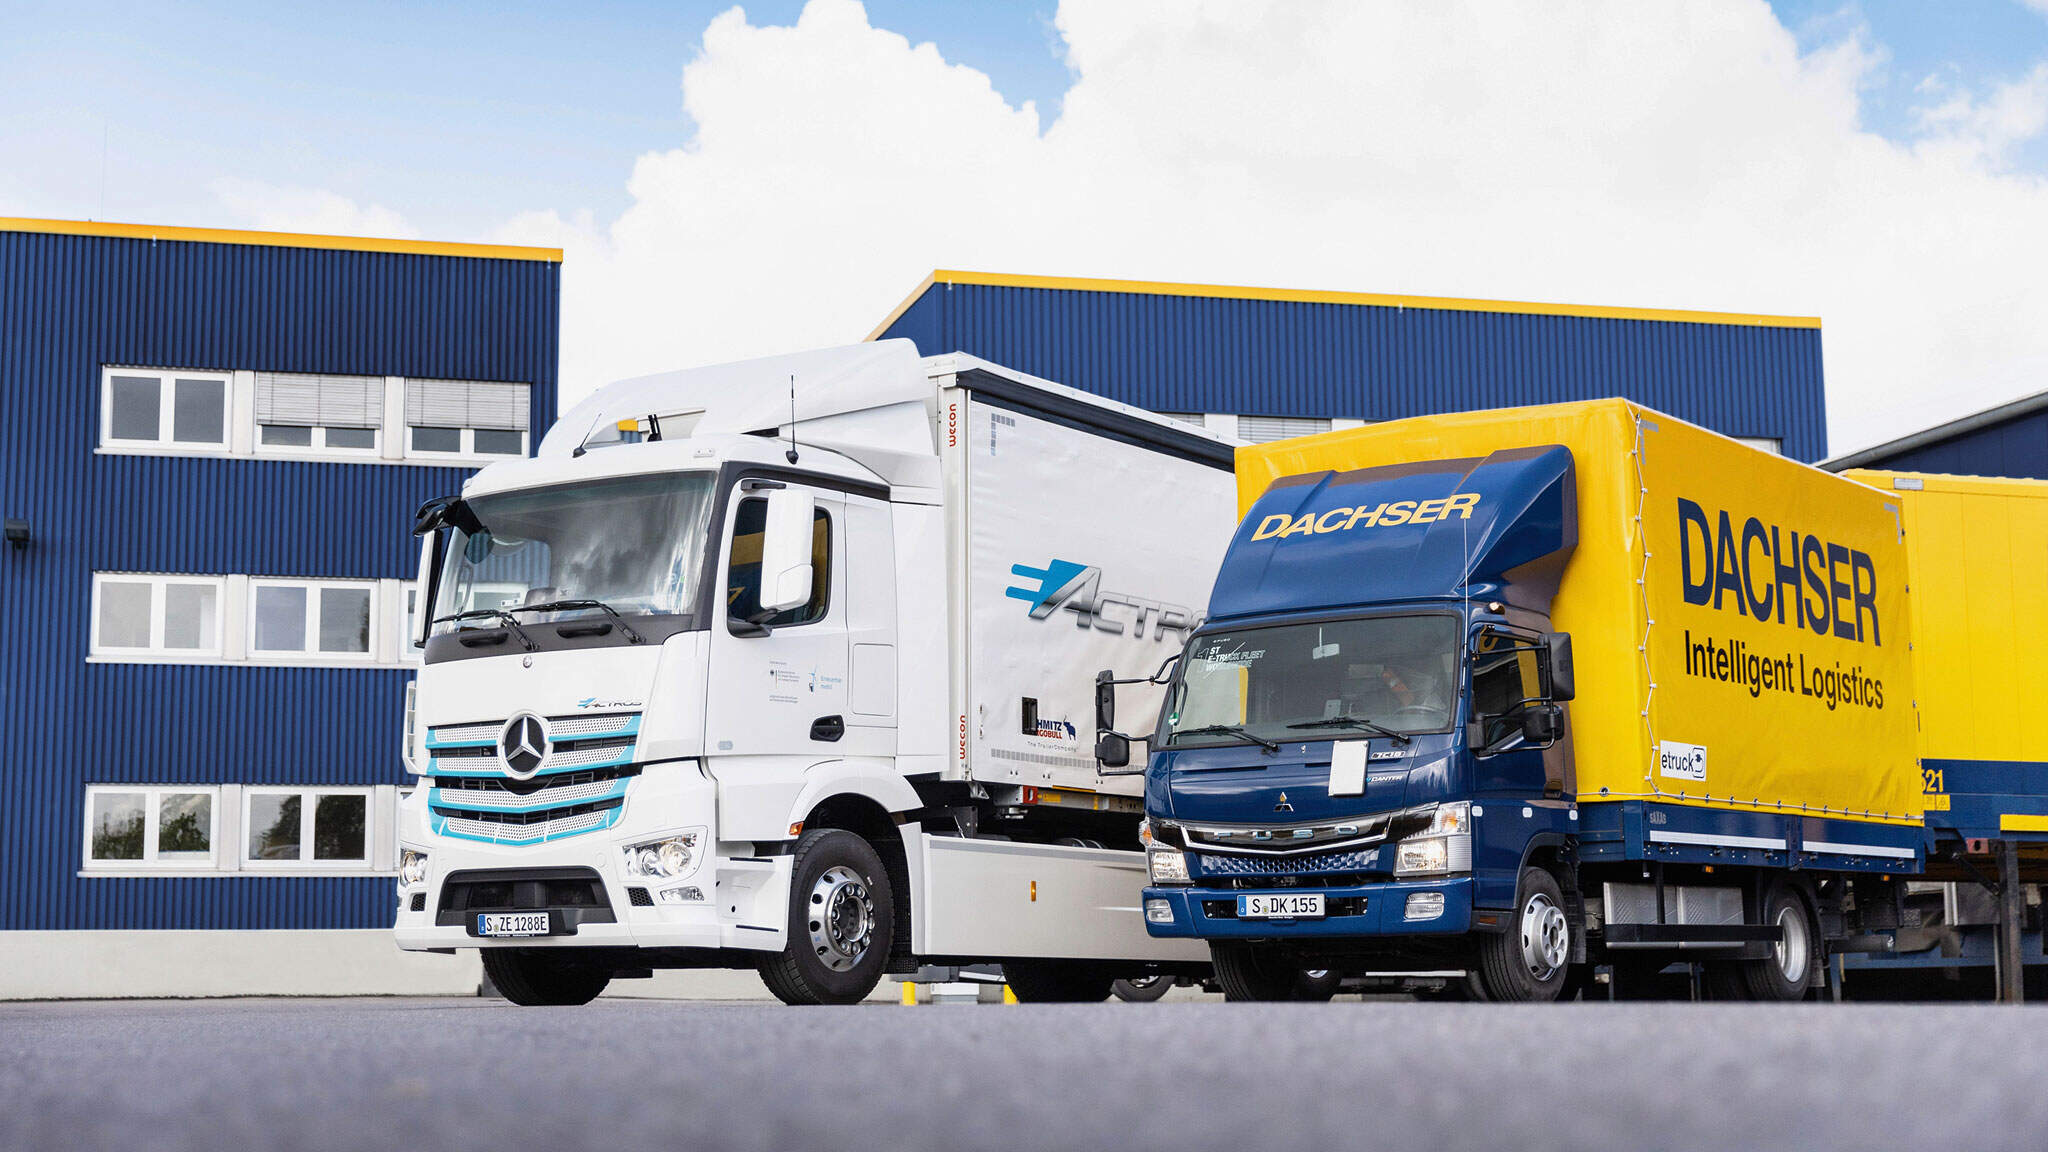 Field tests of electric trucks: The eActros and the eCanter